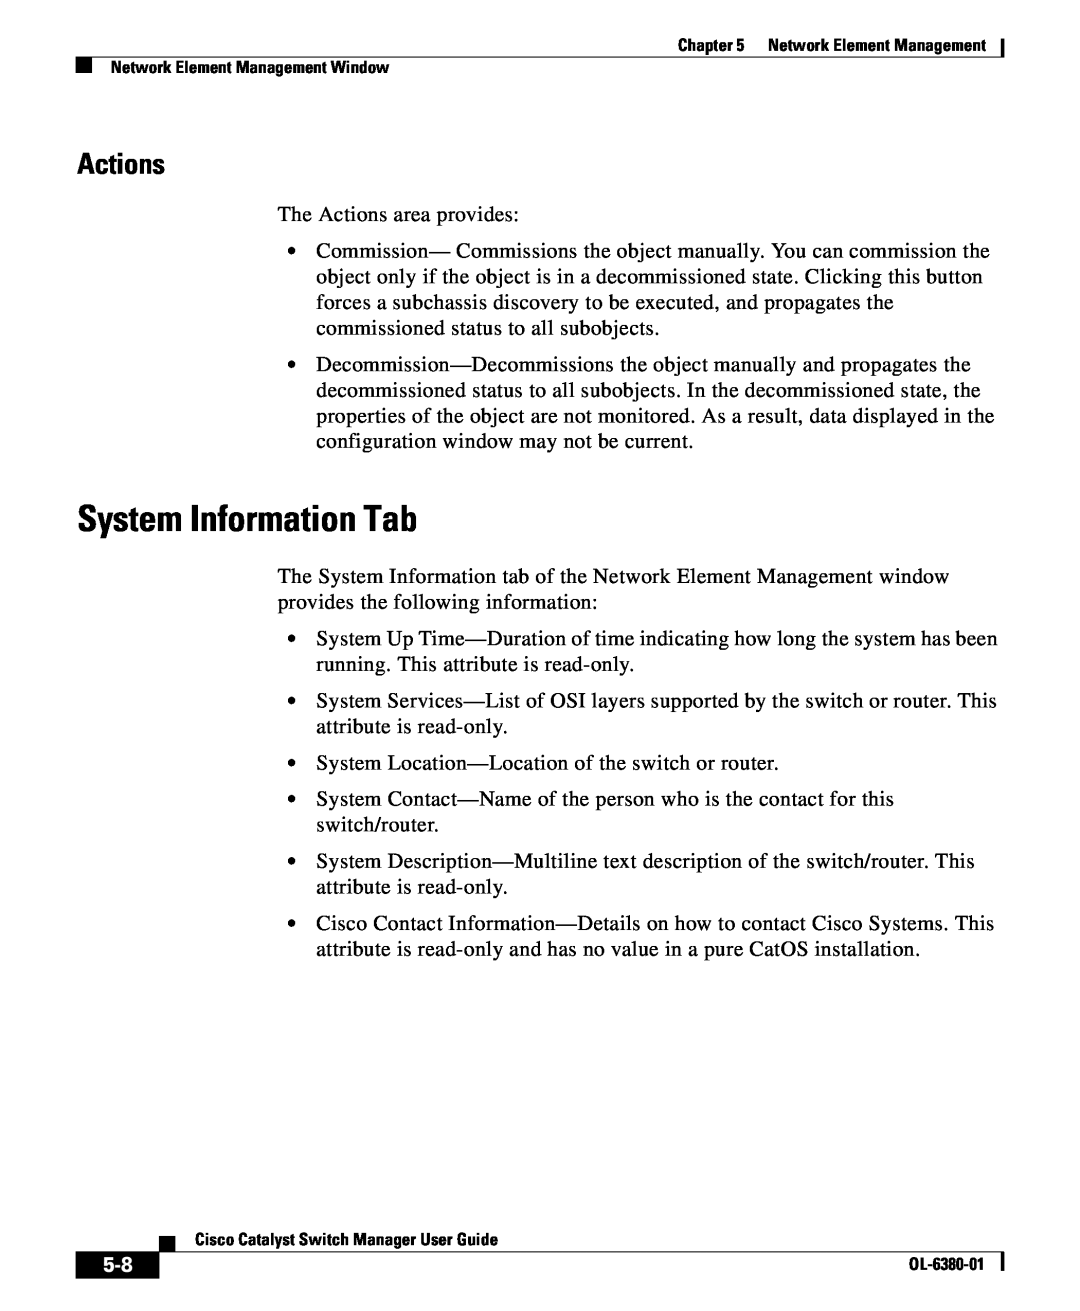 Cisco Systems OL-6380-01 manual System Information Tab, Actions 